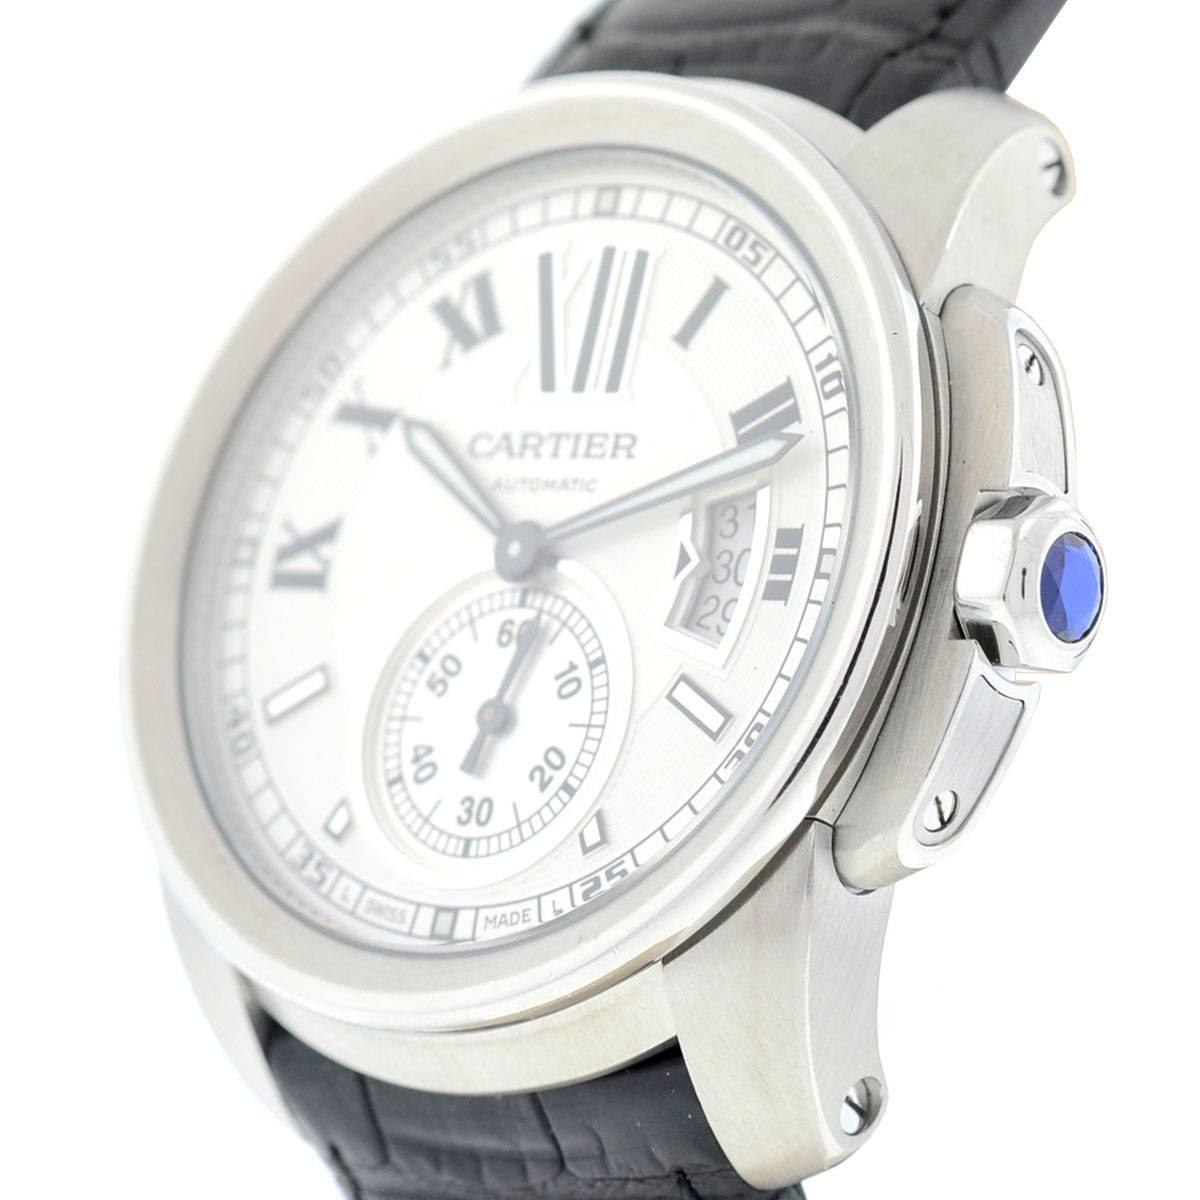 Modern Cartier Stainless Steel Calibre Automatic Wristwatch